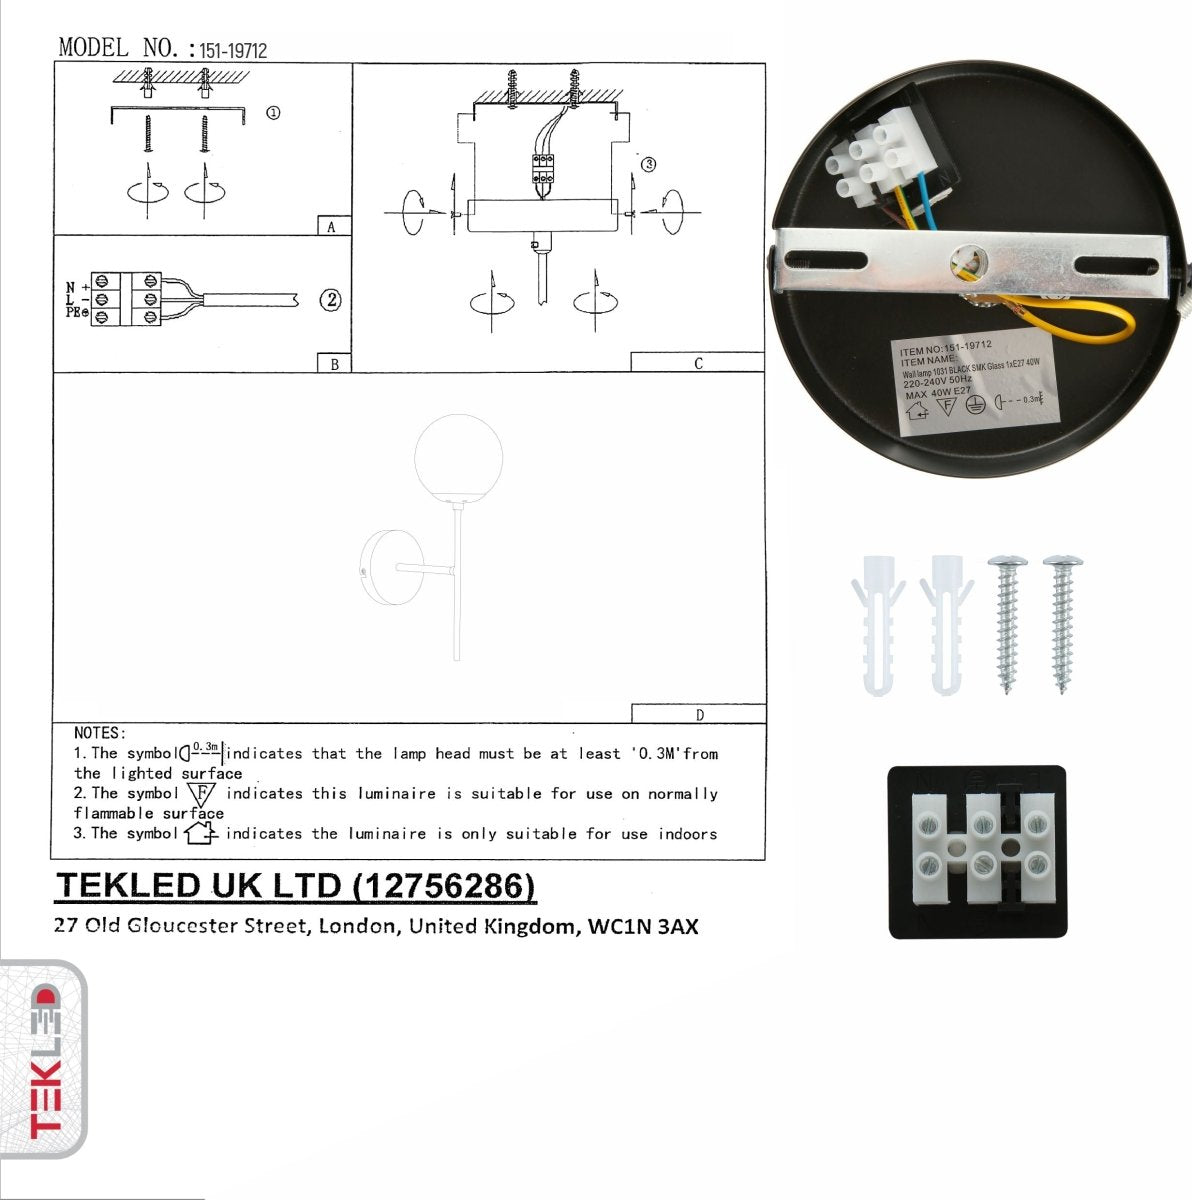 User manual for Smoky Glass Black Metal Wall Light with E27 Fitting | TEKLED 151-19712